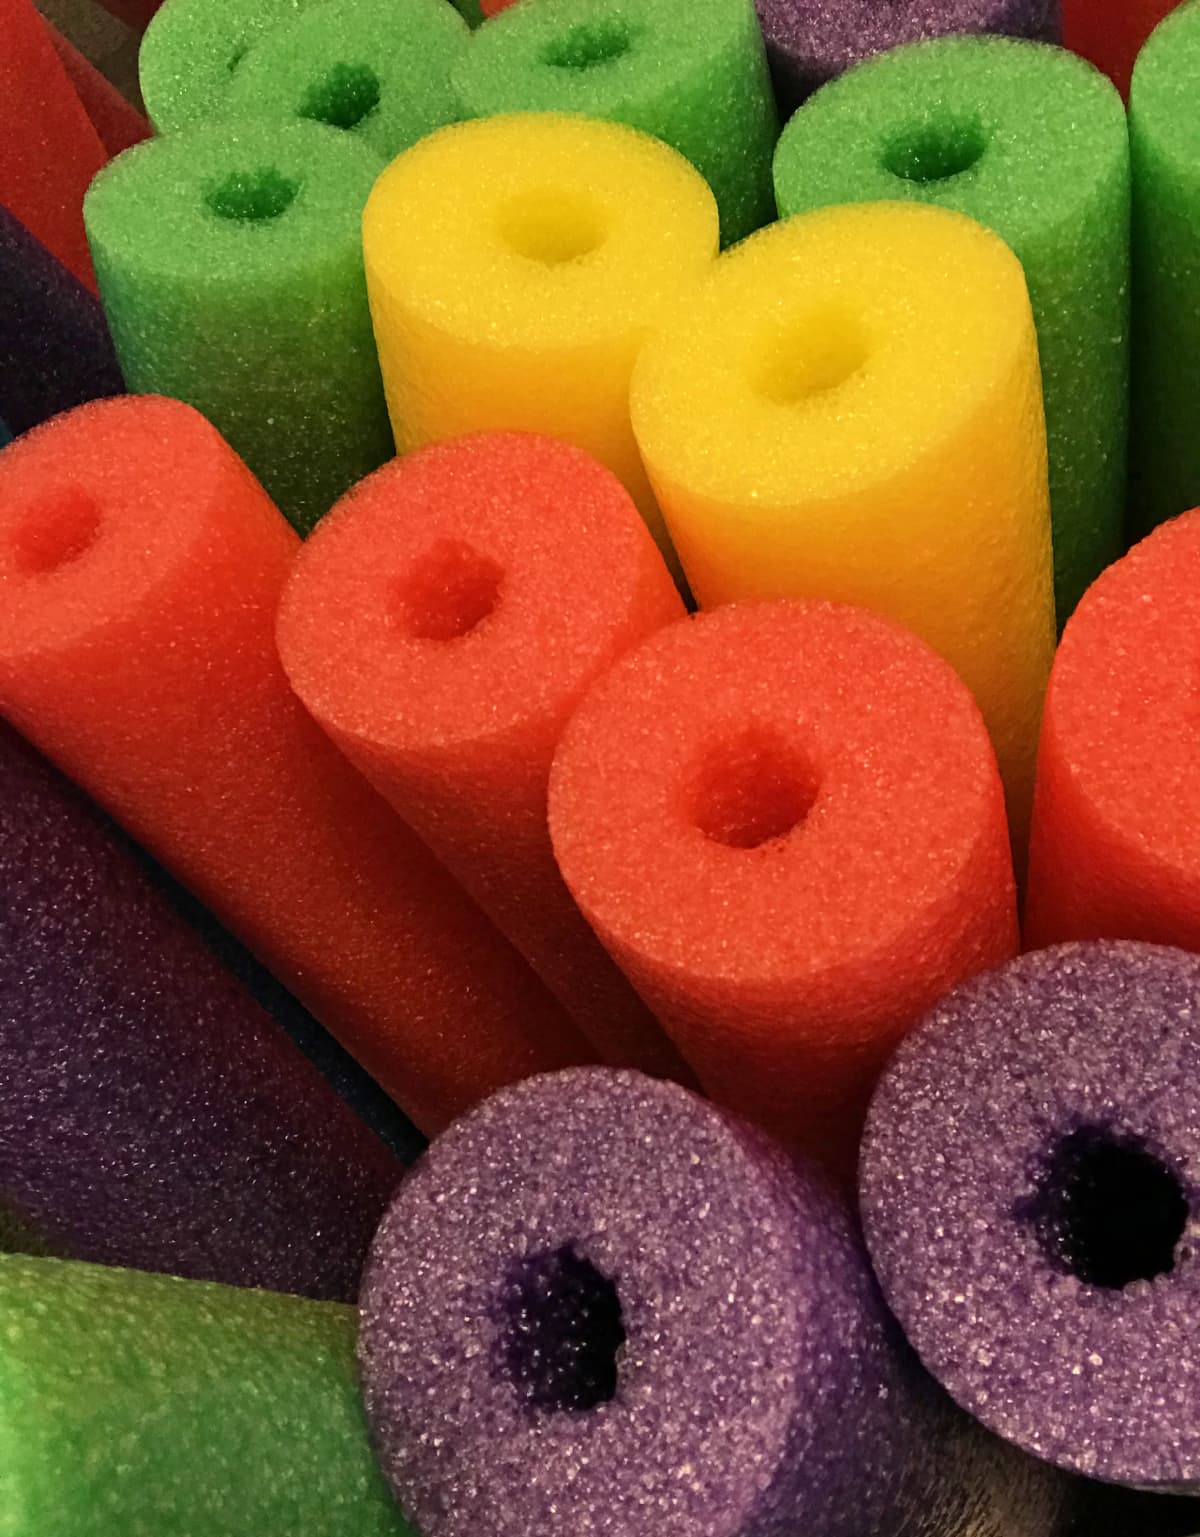 Pool noodles of varying colors